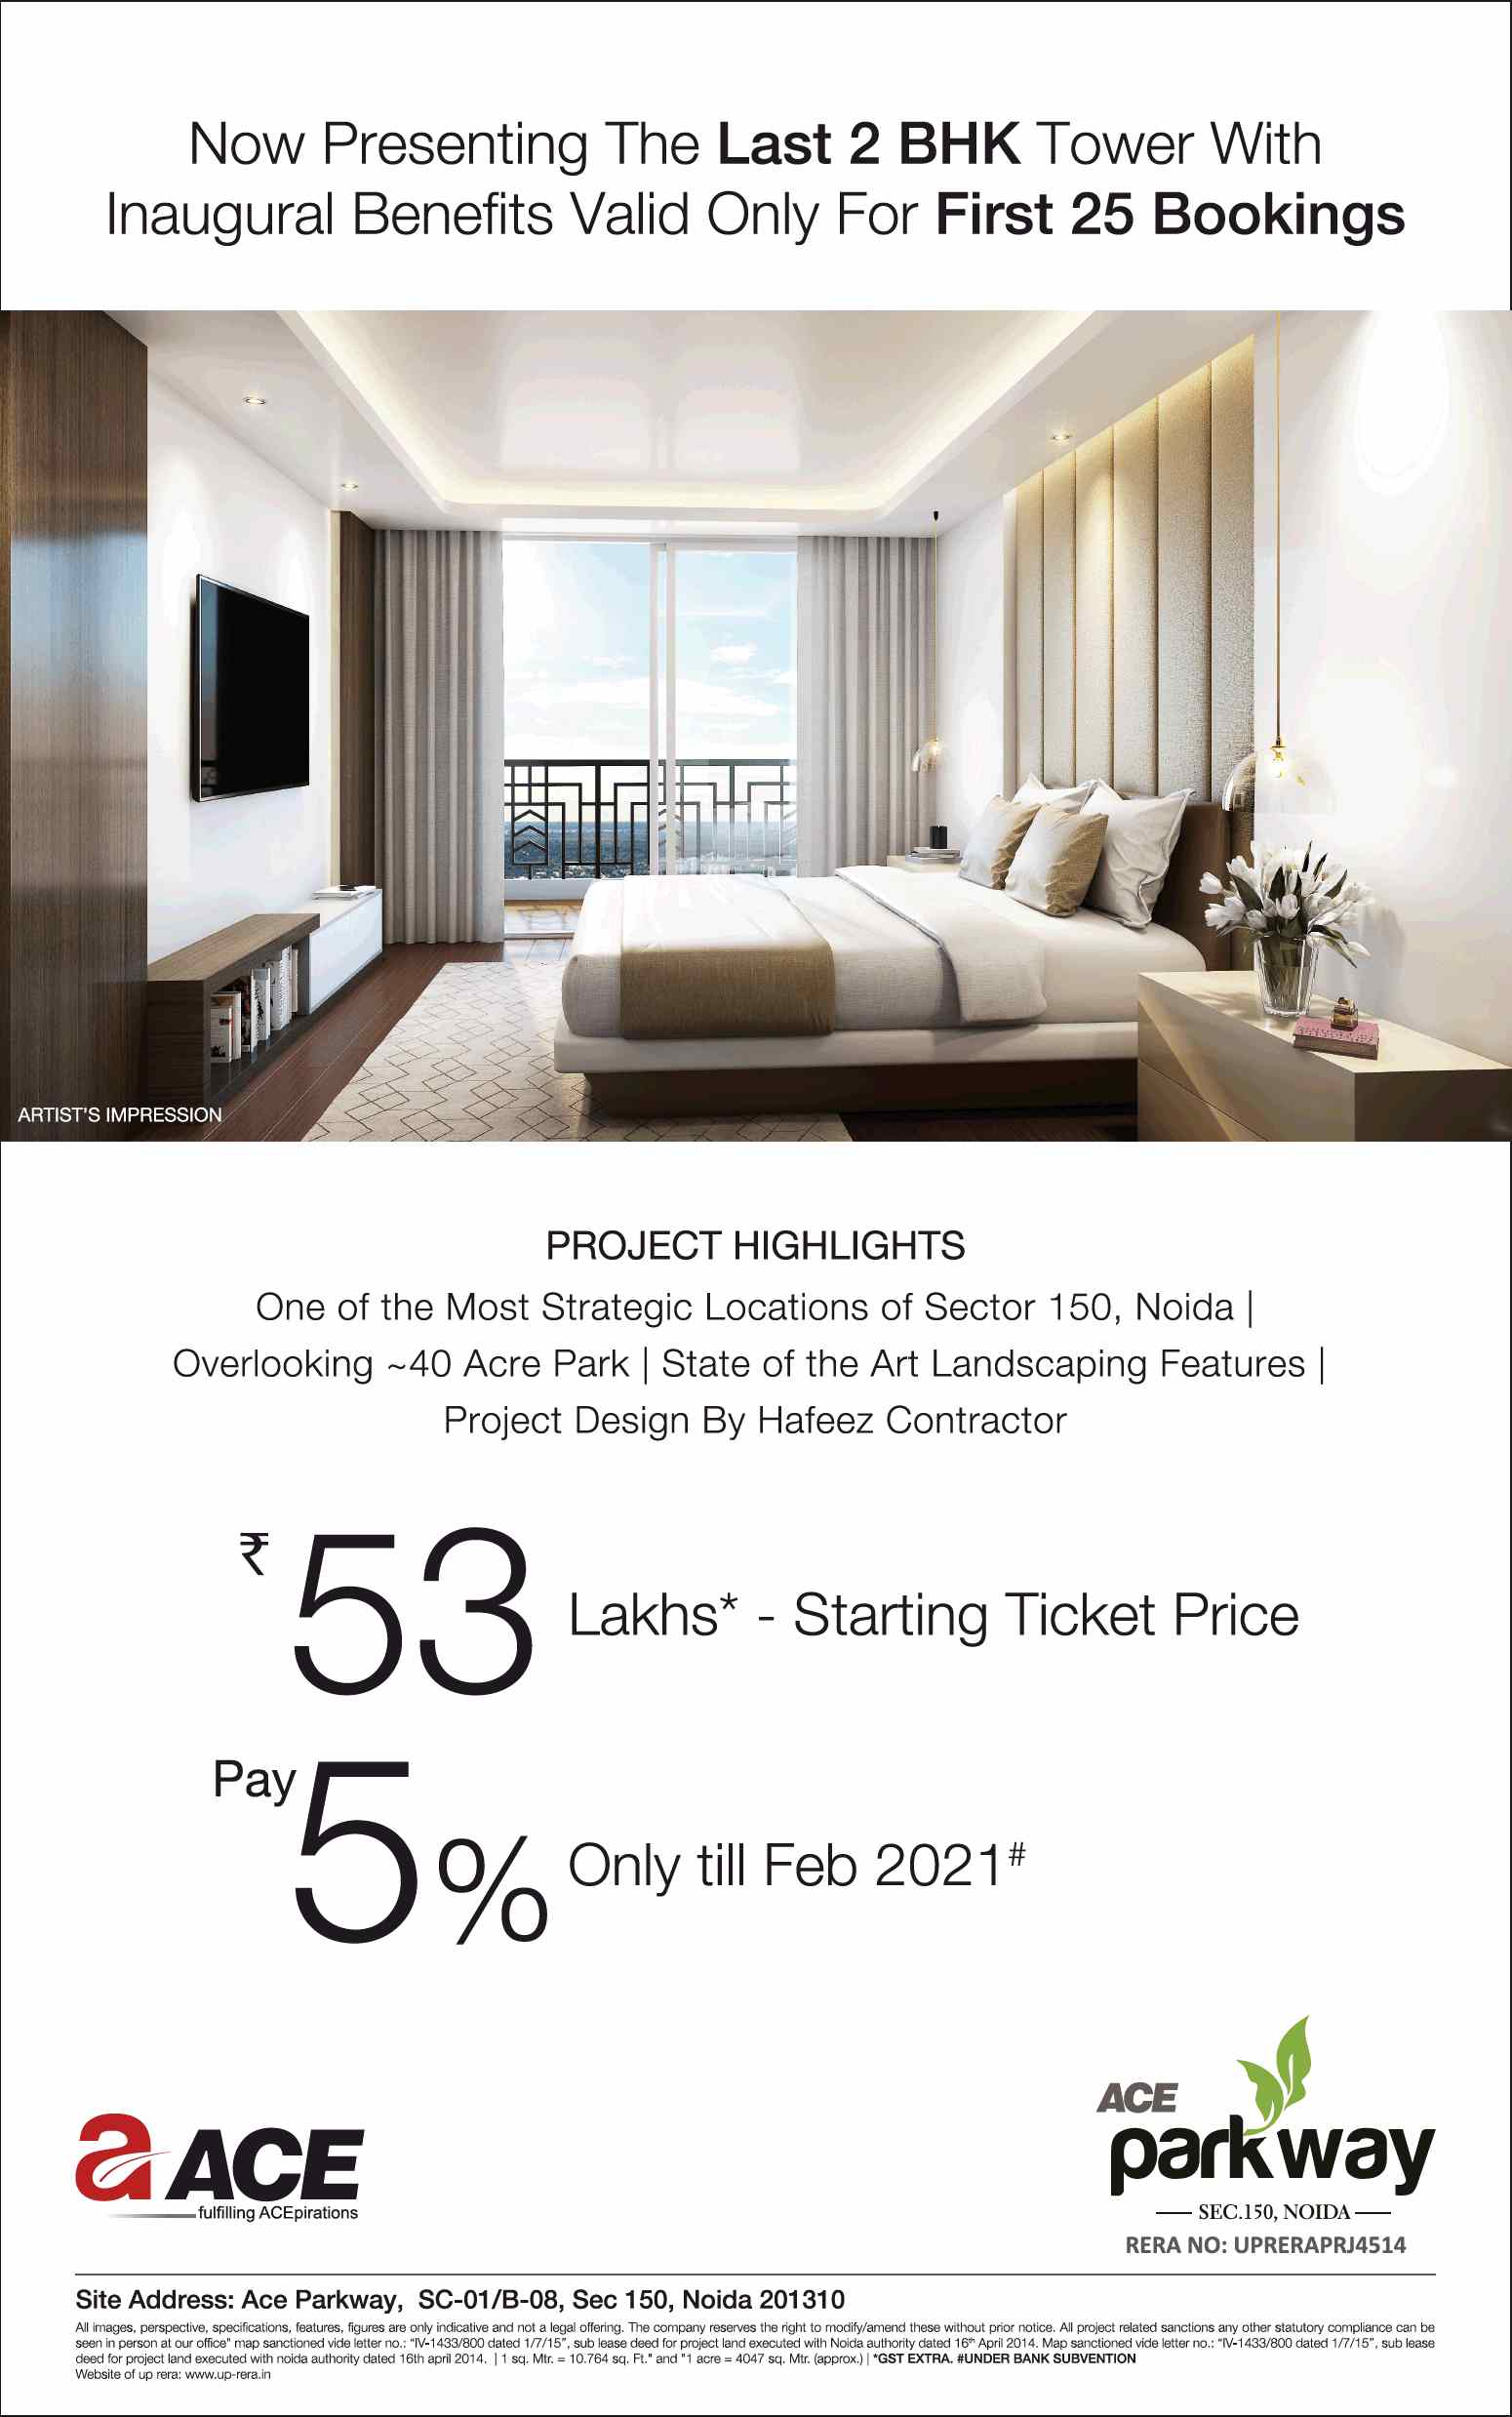 Pay 5% only till Feb 2021 at Ace Parkway in Noida